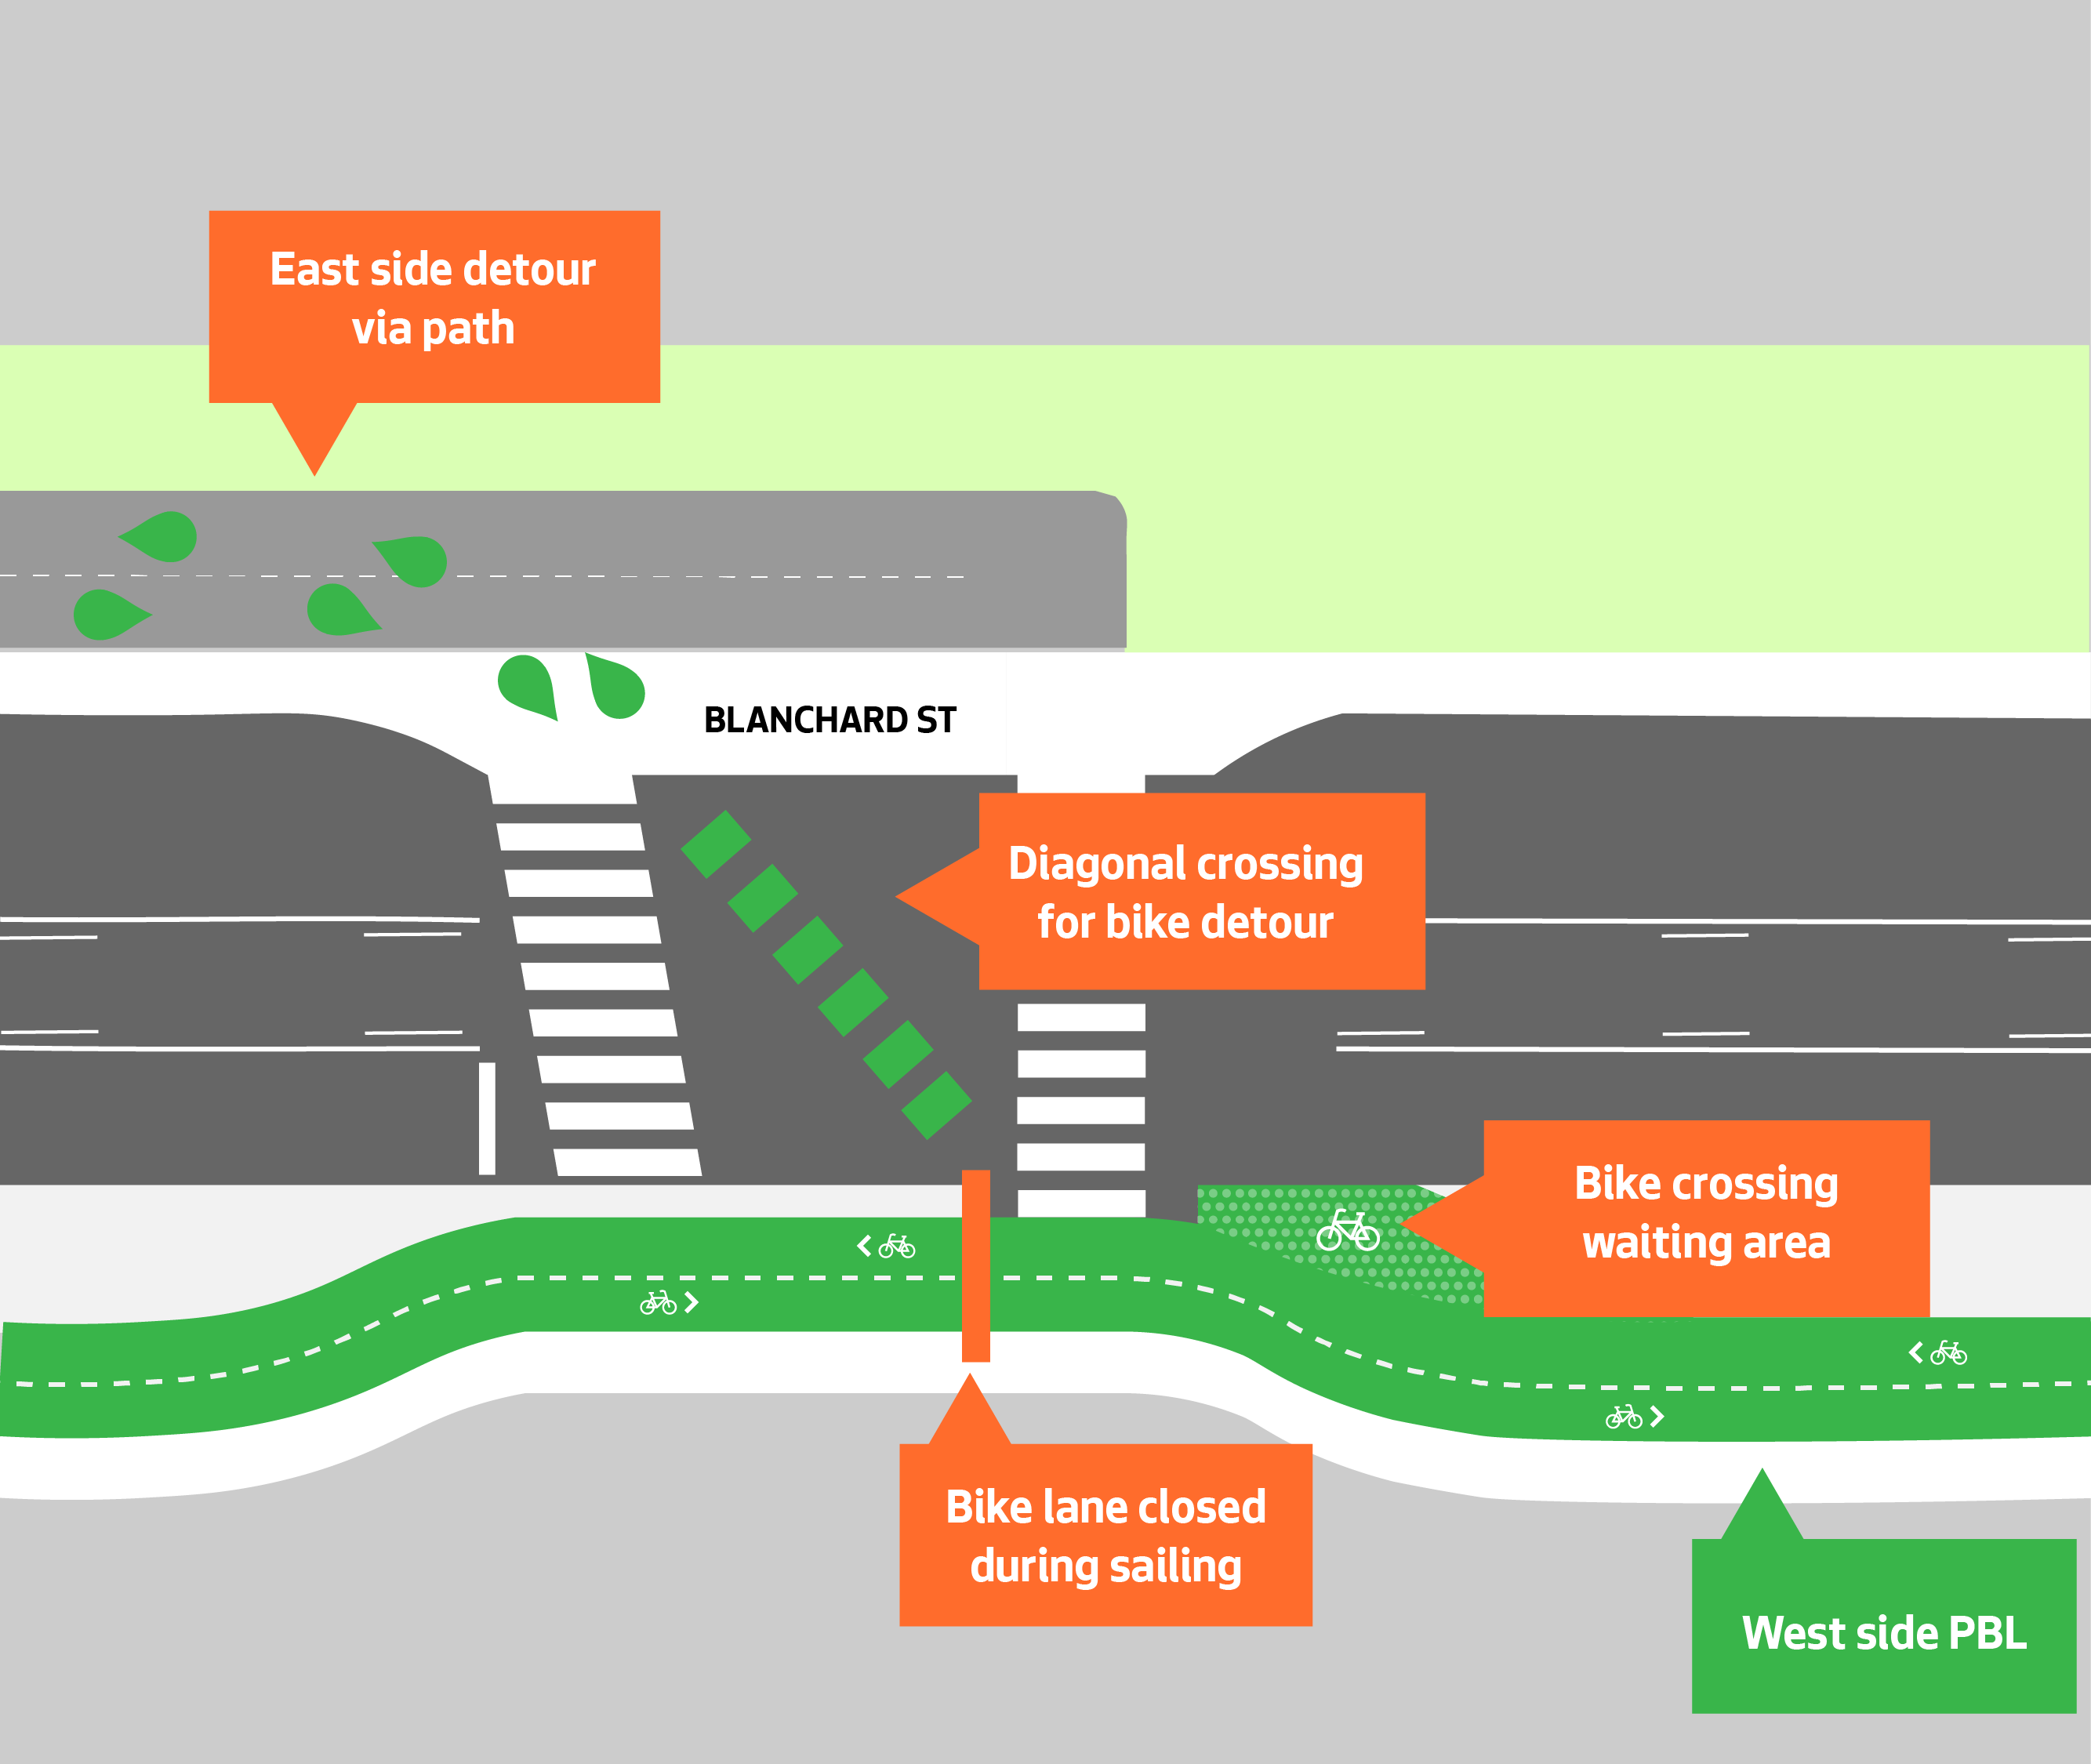 Graphic showing intersection changes at Alaskan Way and Blanchard St.